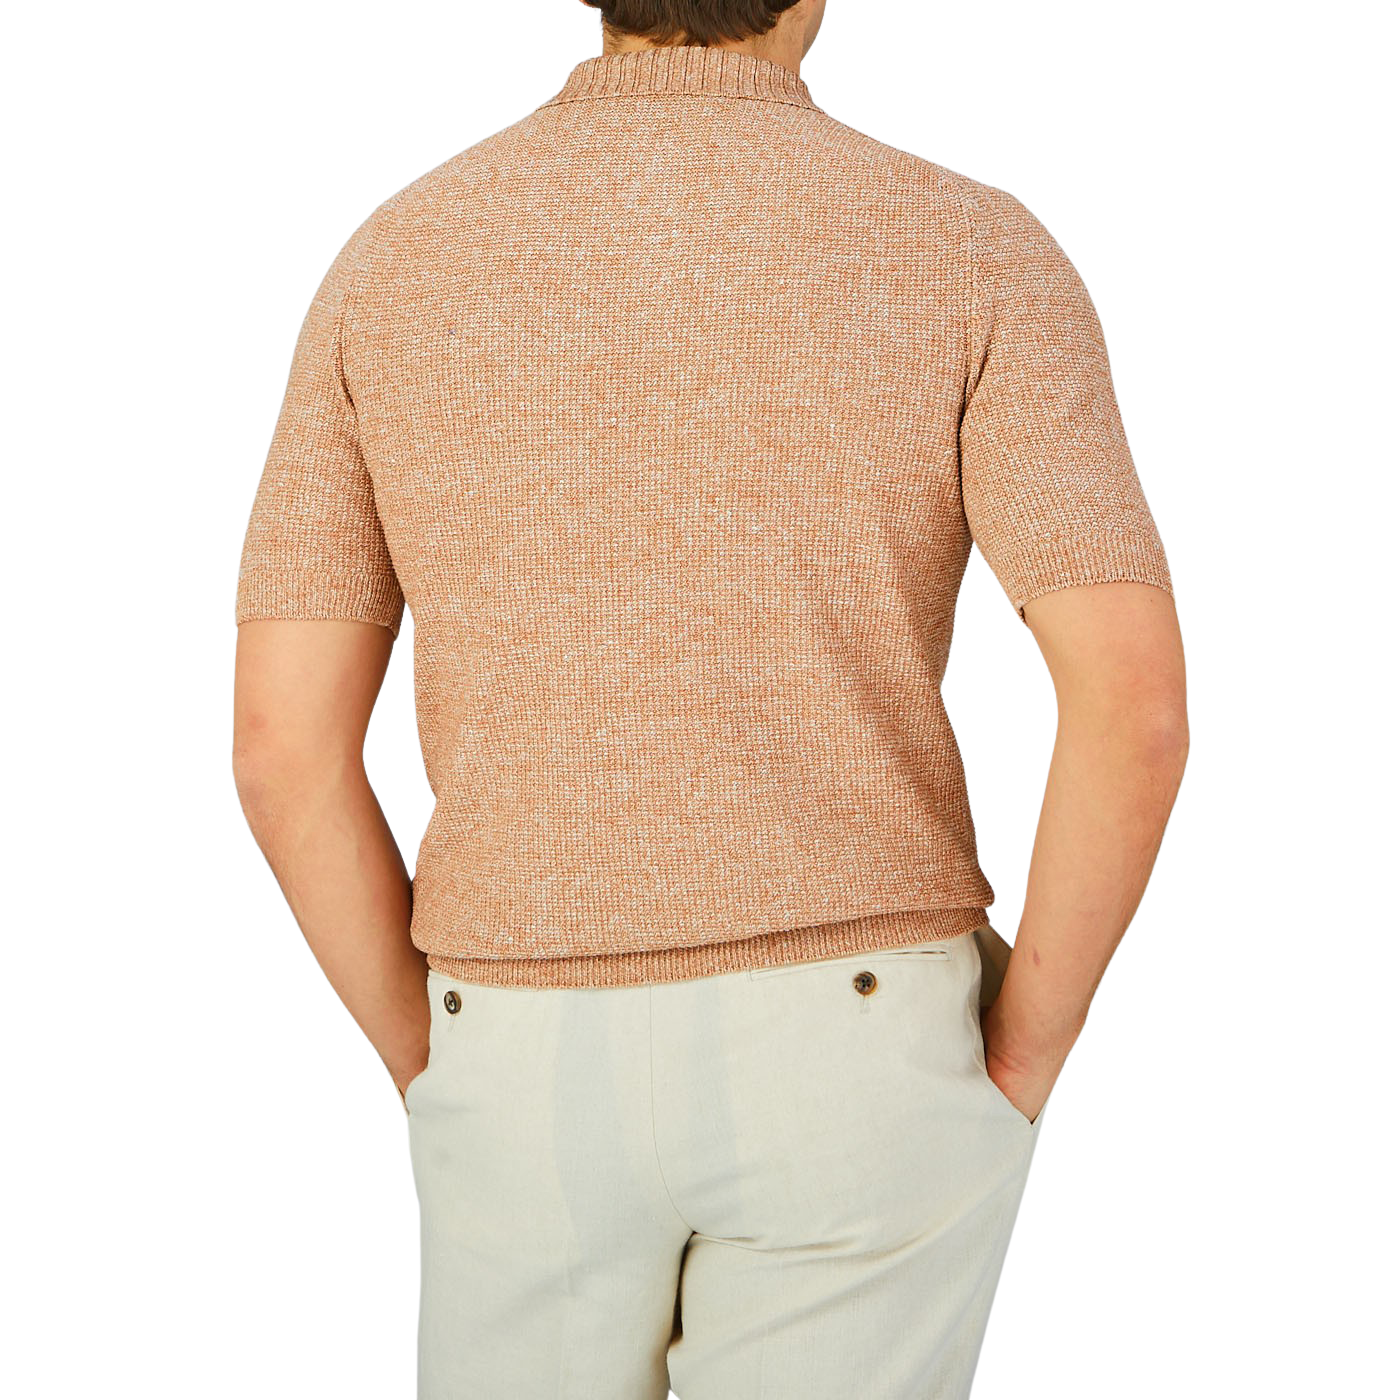 The back view of a man wearing a Gran Sasso Rust Orange Cotton Linen Polo Shirt.